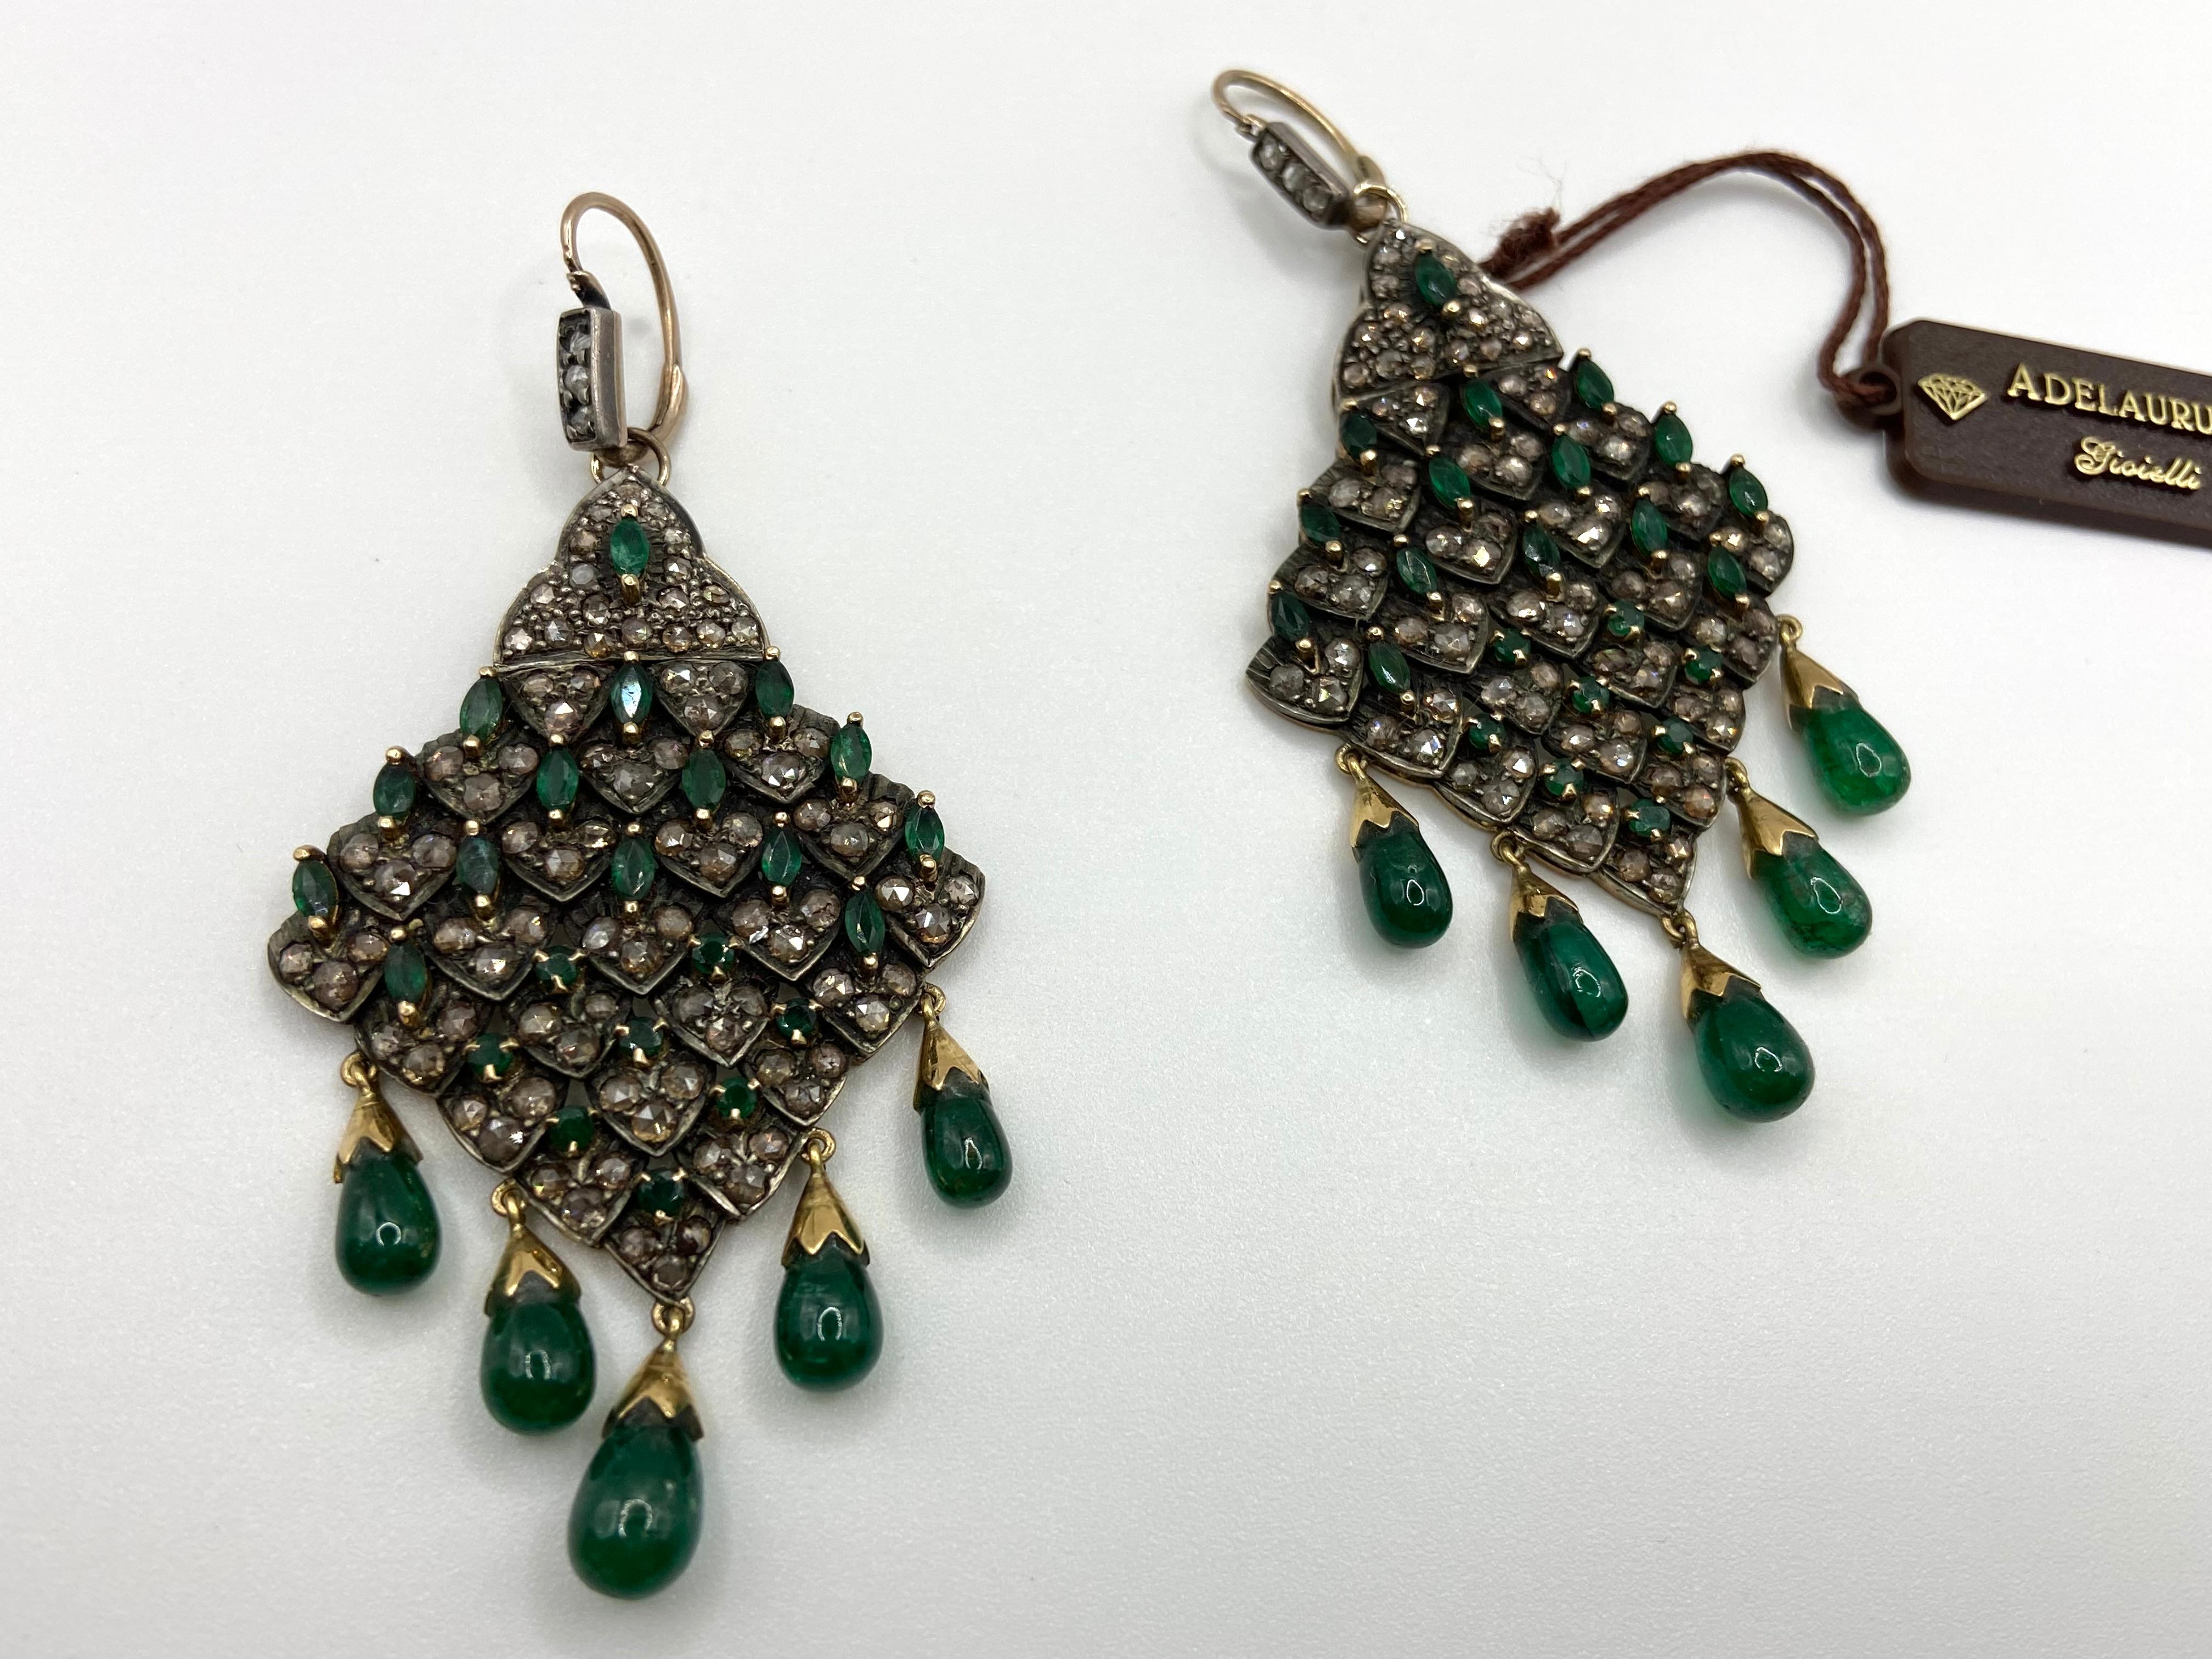 Antique Style Earrings 9Kt Gold, Diamonds, Emeralds
Pendant earrings, Antique style, Neapolitan manufacture, in 9 Kt Gold, Silver Coppella. Set natural diamonds, 